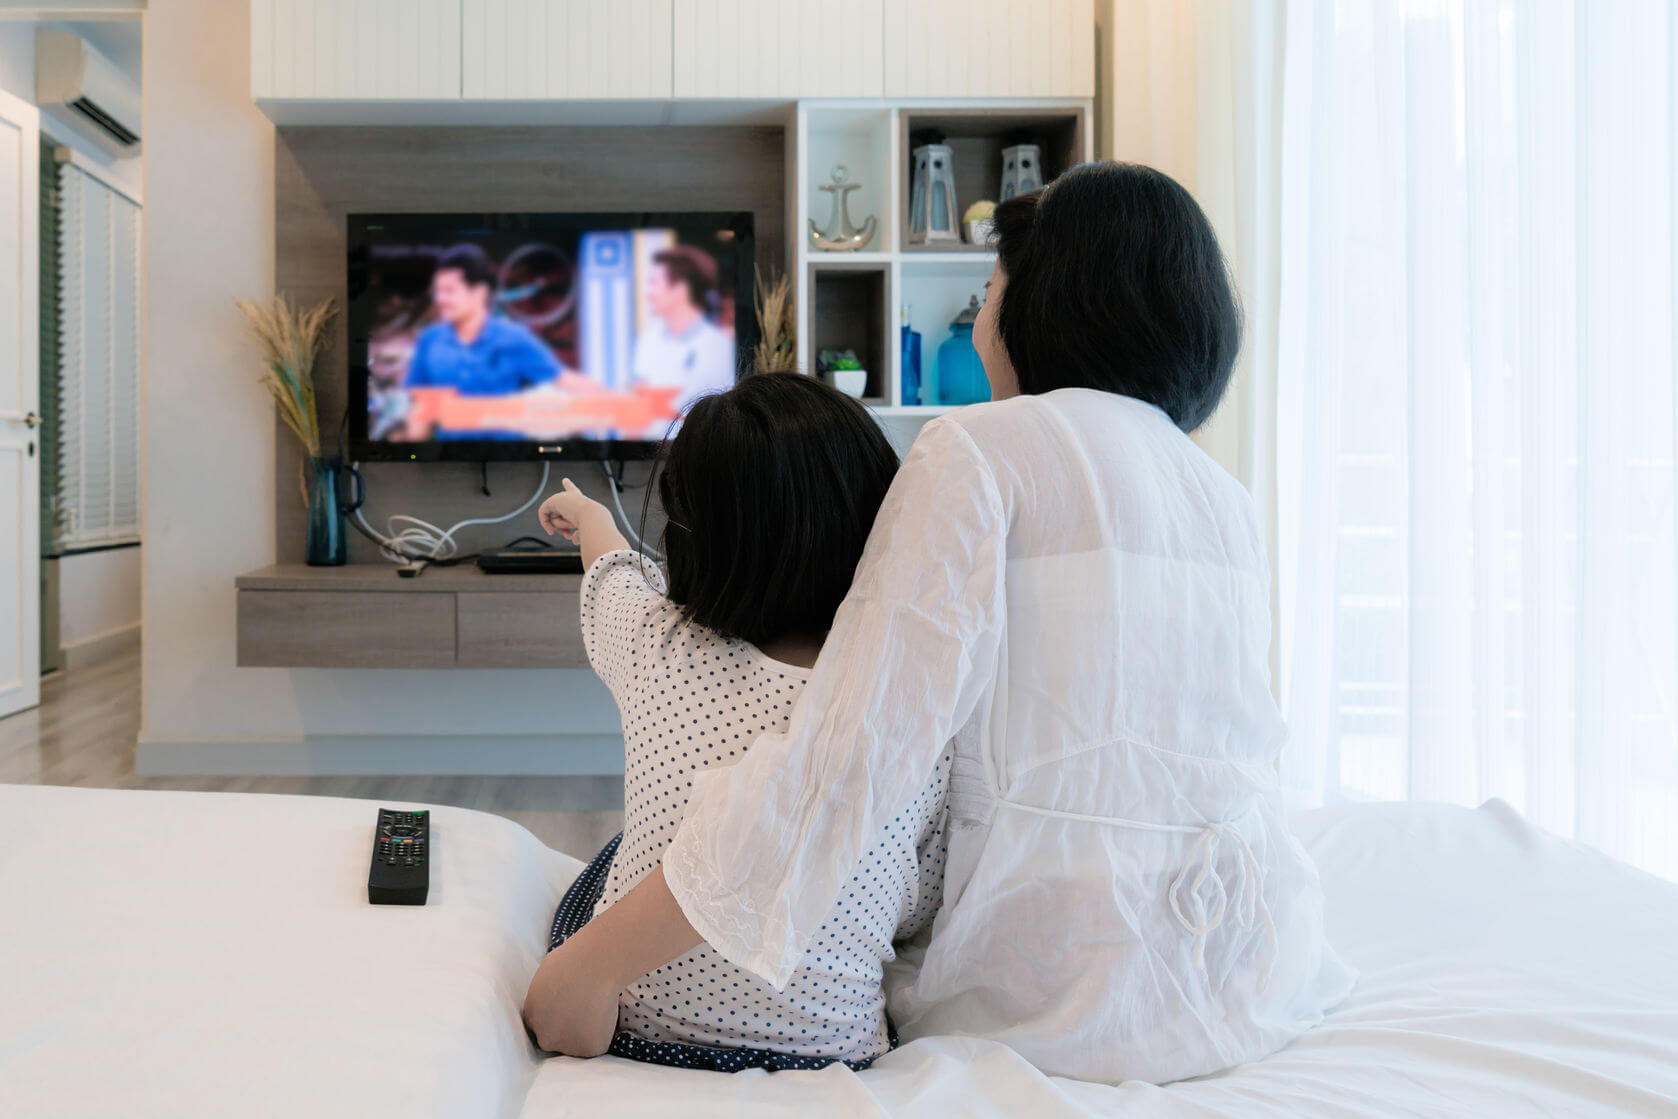 Tips how to resolve child who watch tv a lot